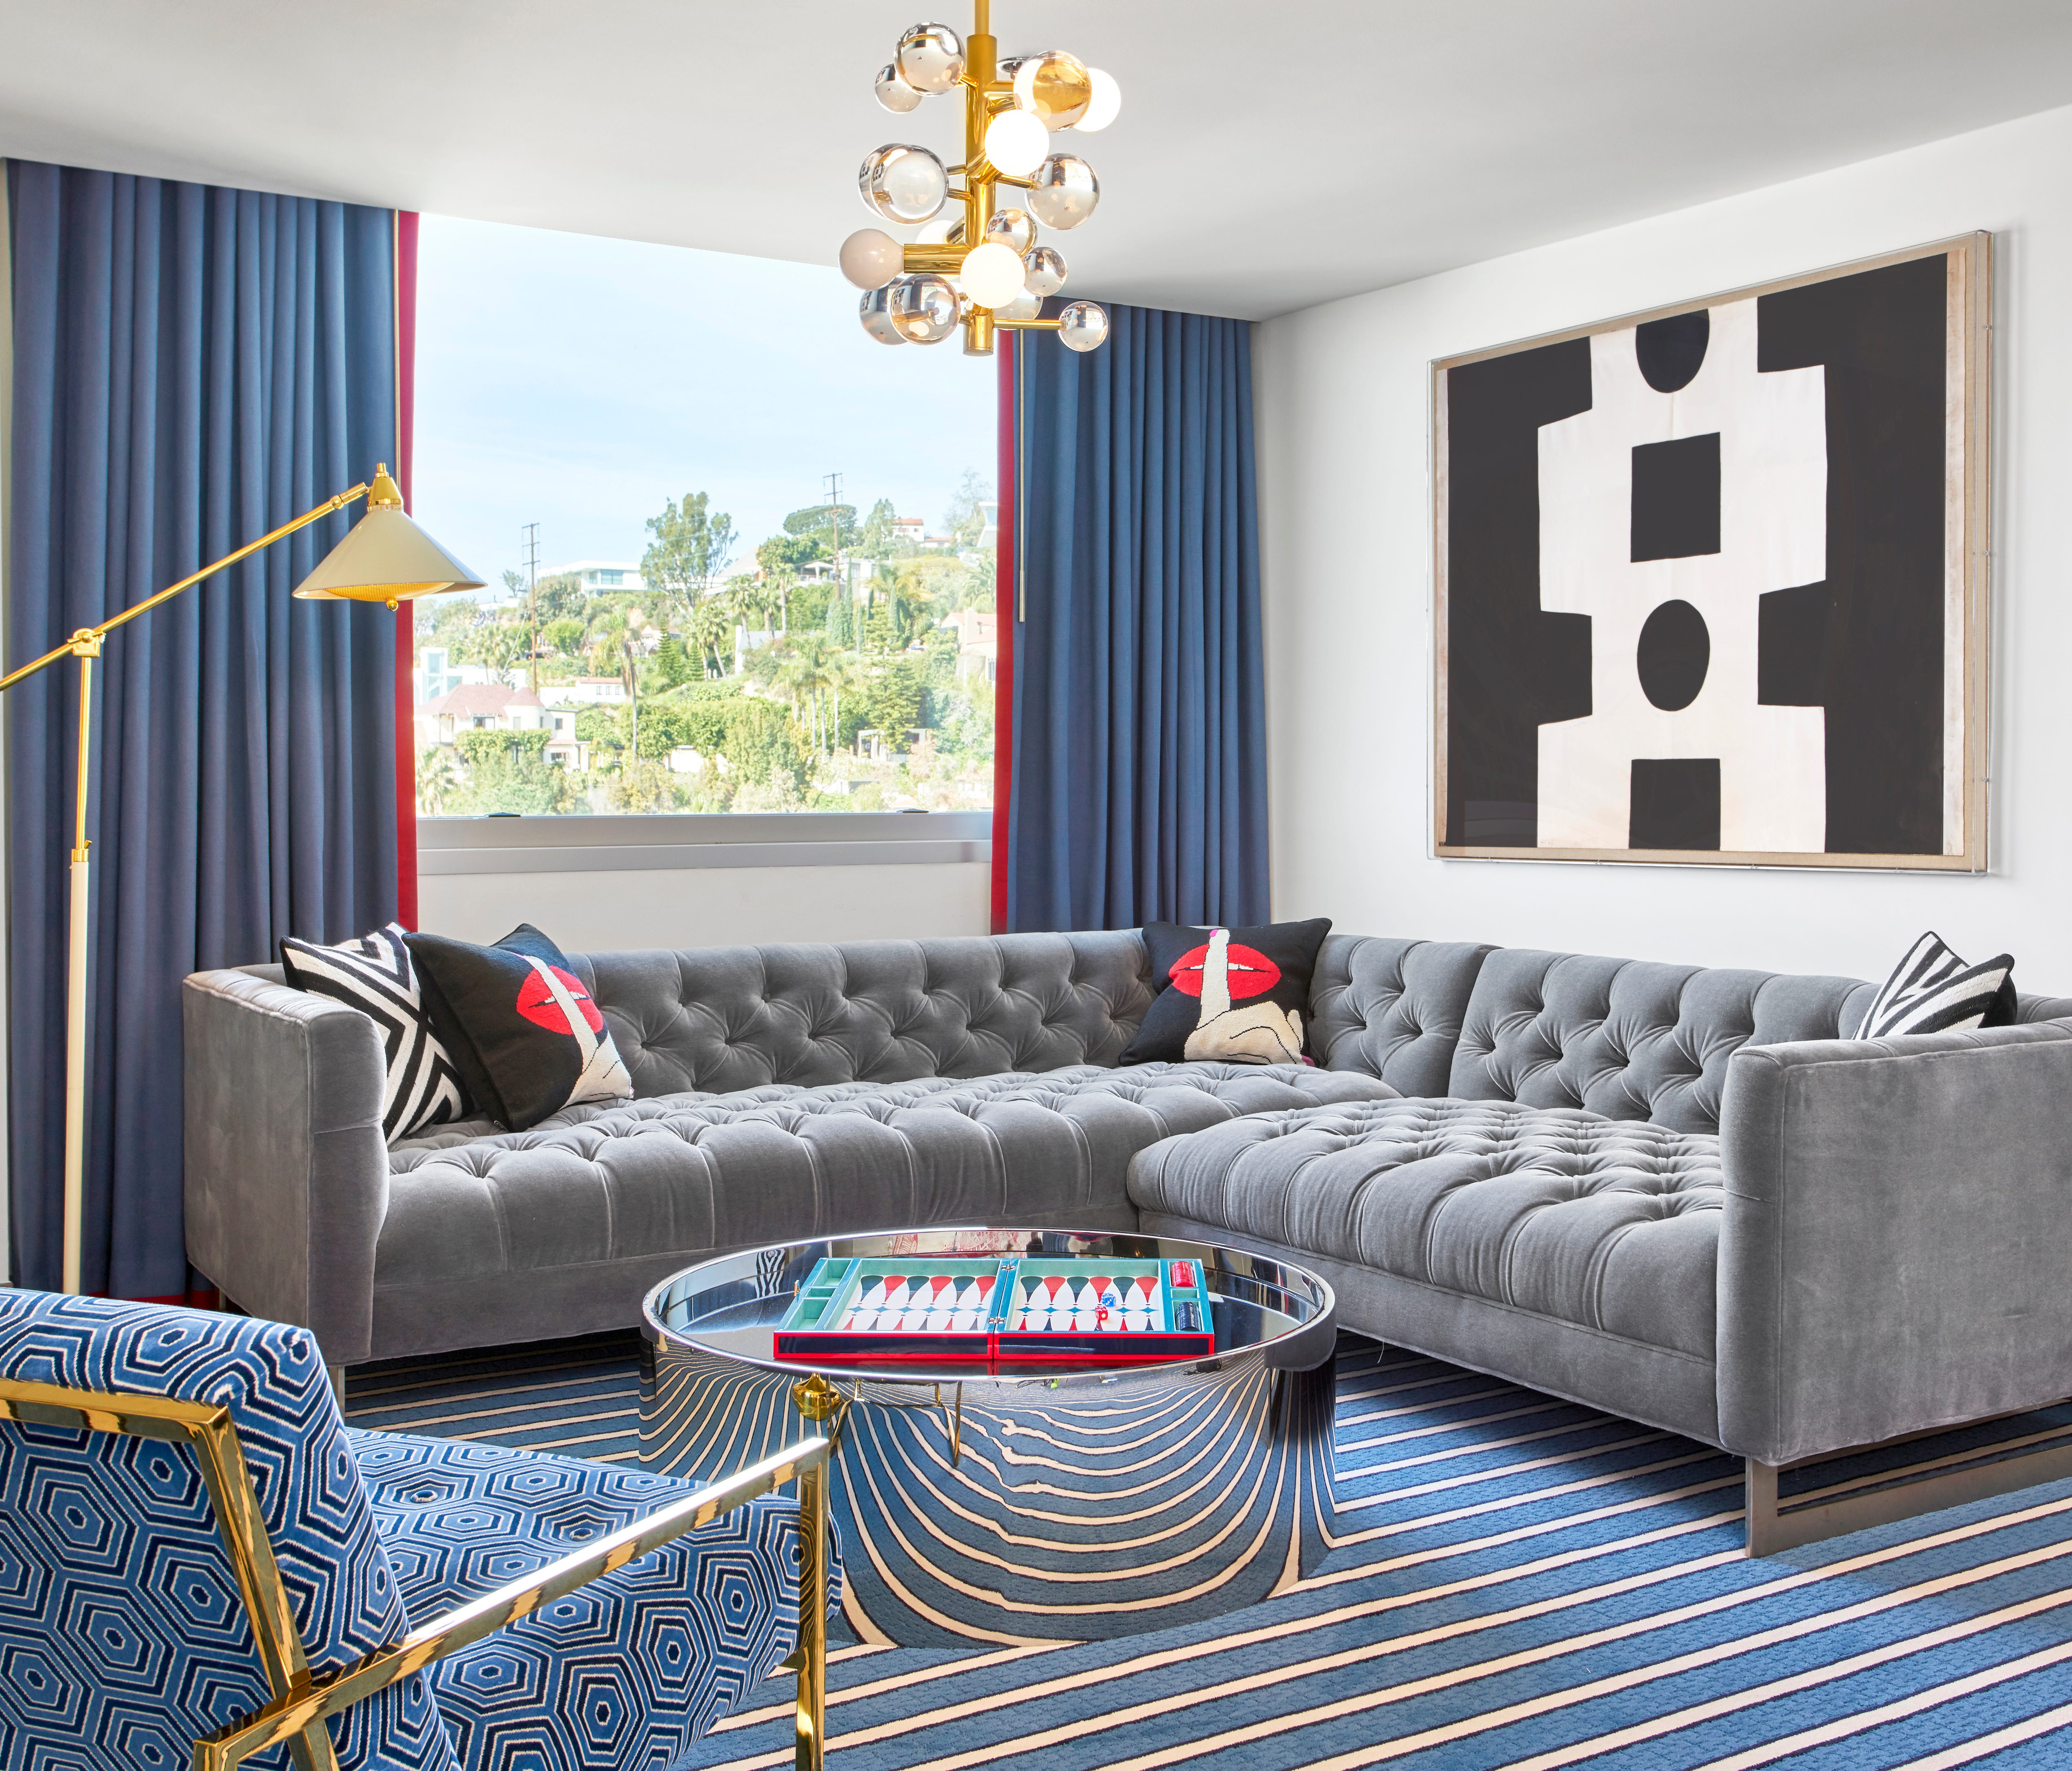 The (Andaz)RED suite was recently reimagined by designer Johnathan Adler.